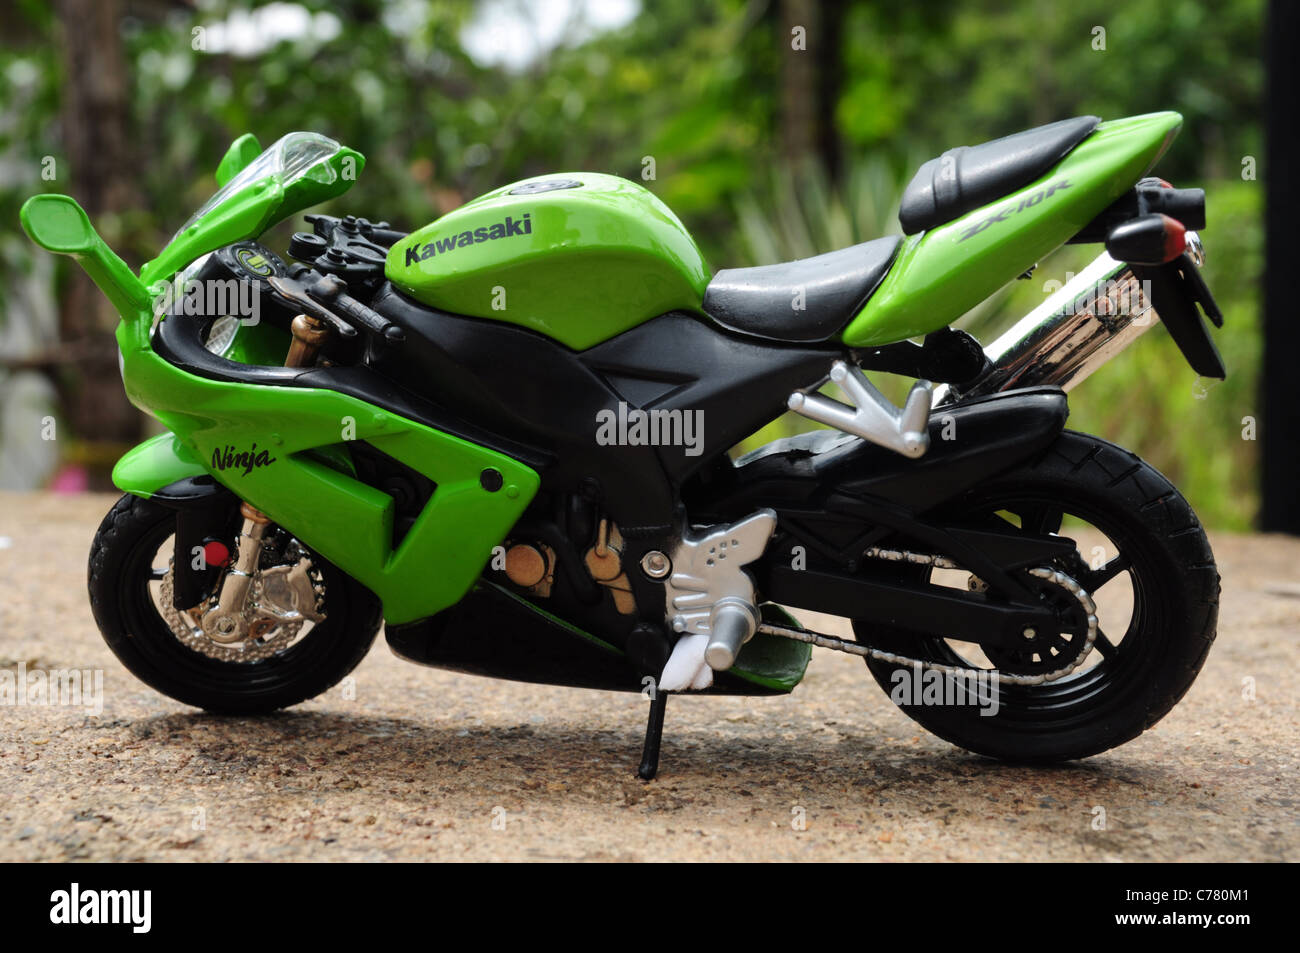 Kawasaki Ninja ZX6R secures 25 unit sales in the first month